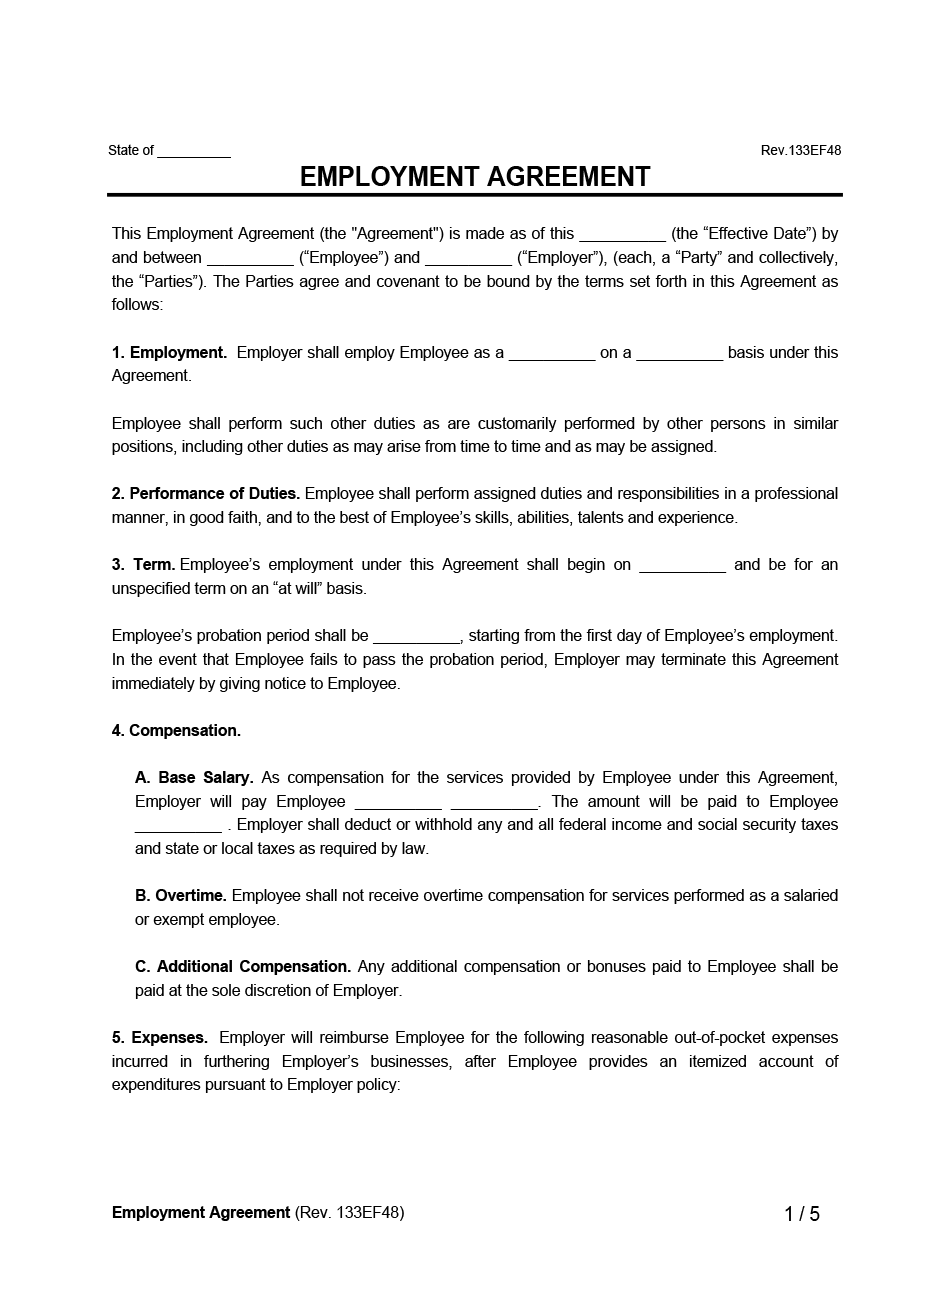 Employment Agreement Example Form